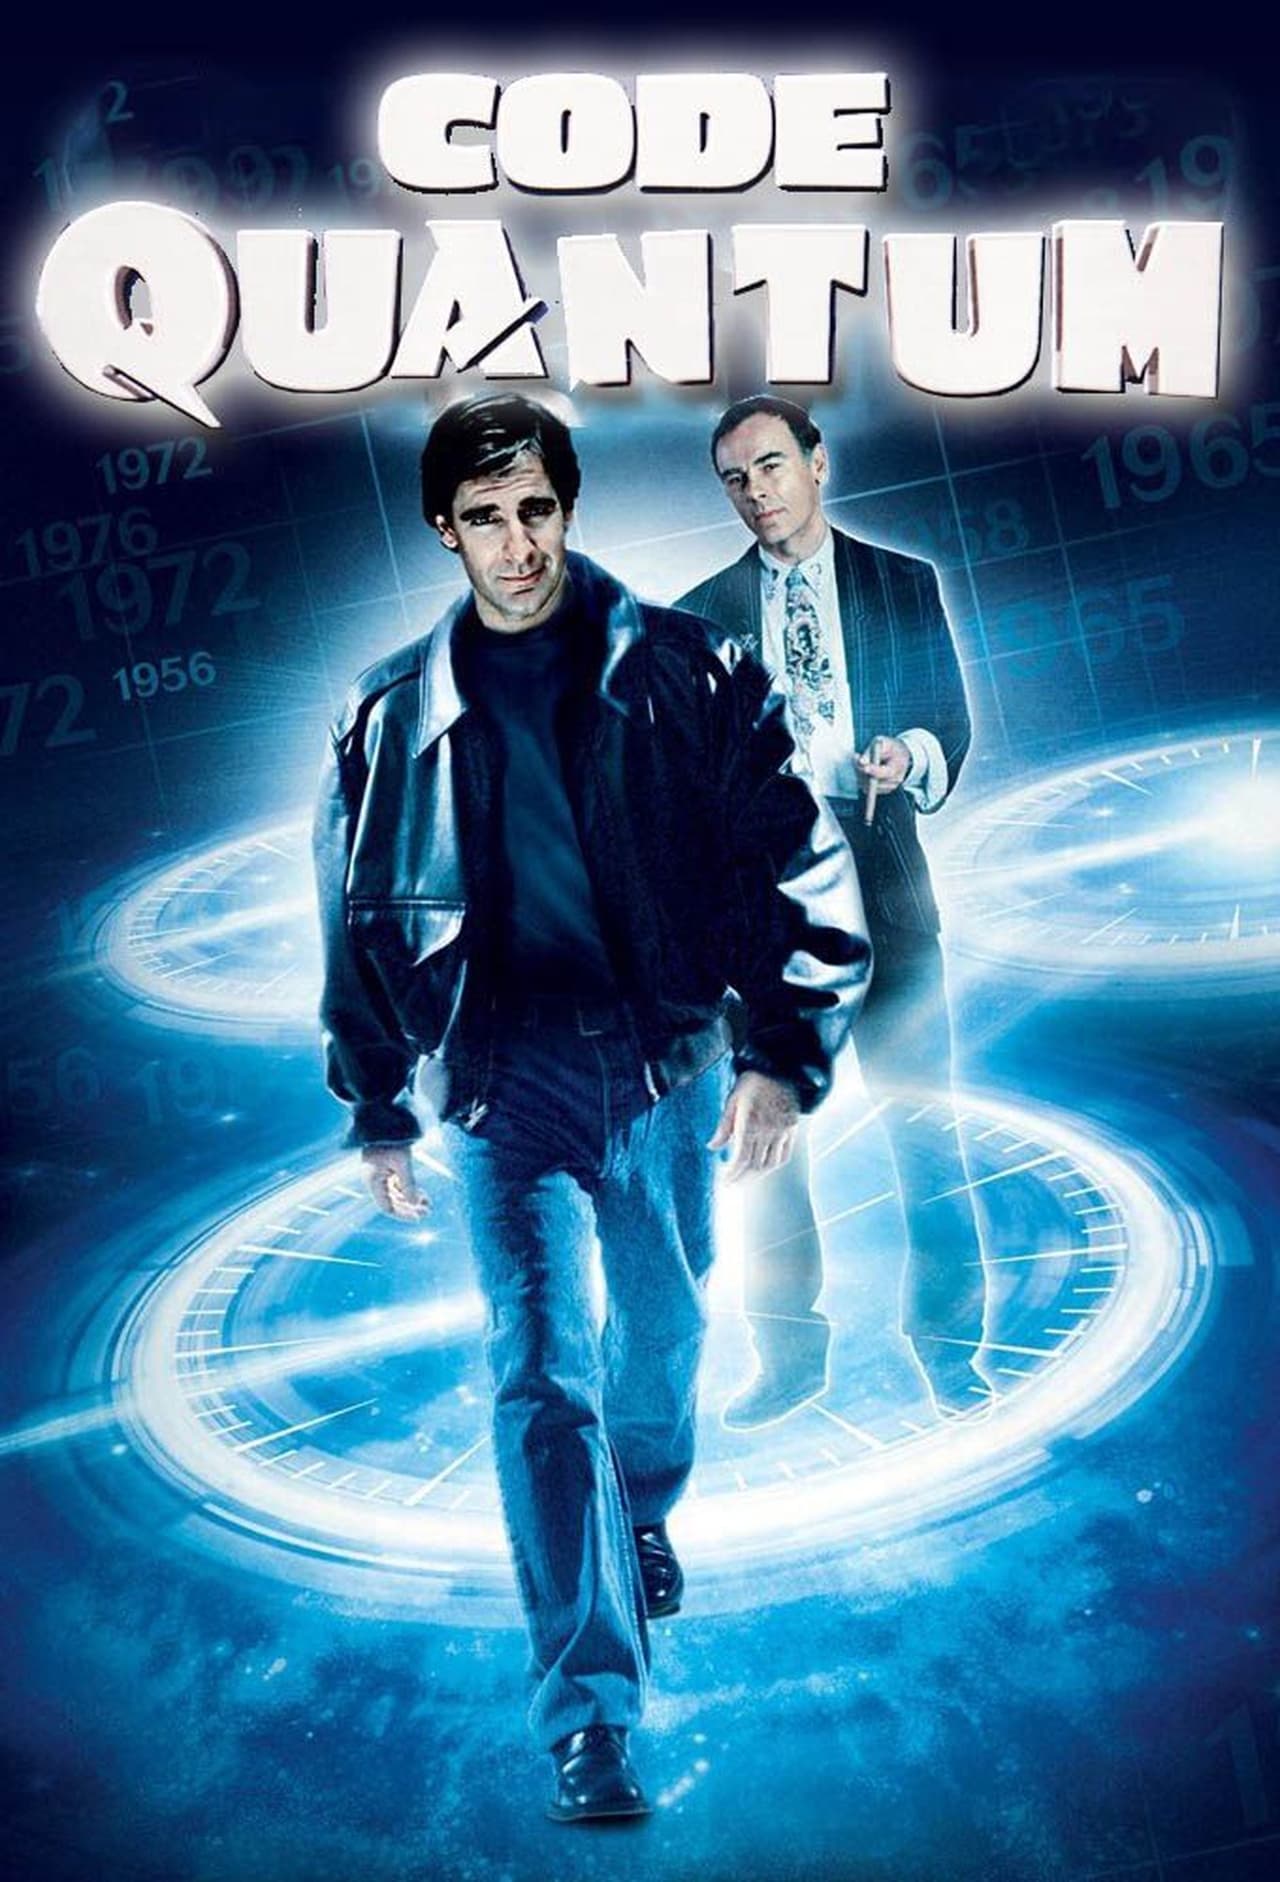 Quantum Leap, Season 1 release date, trailers, cast, synopsis and reviews